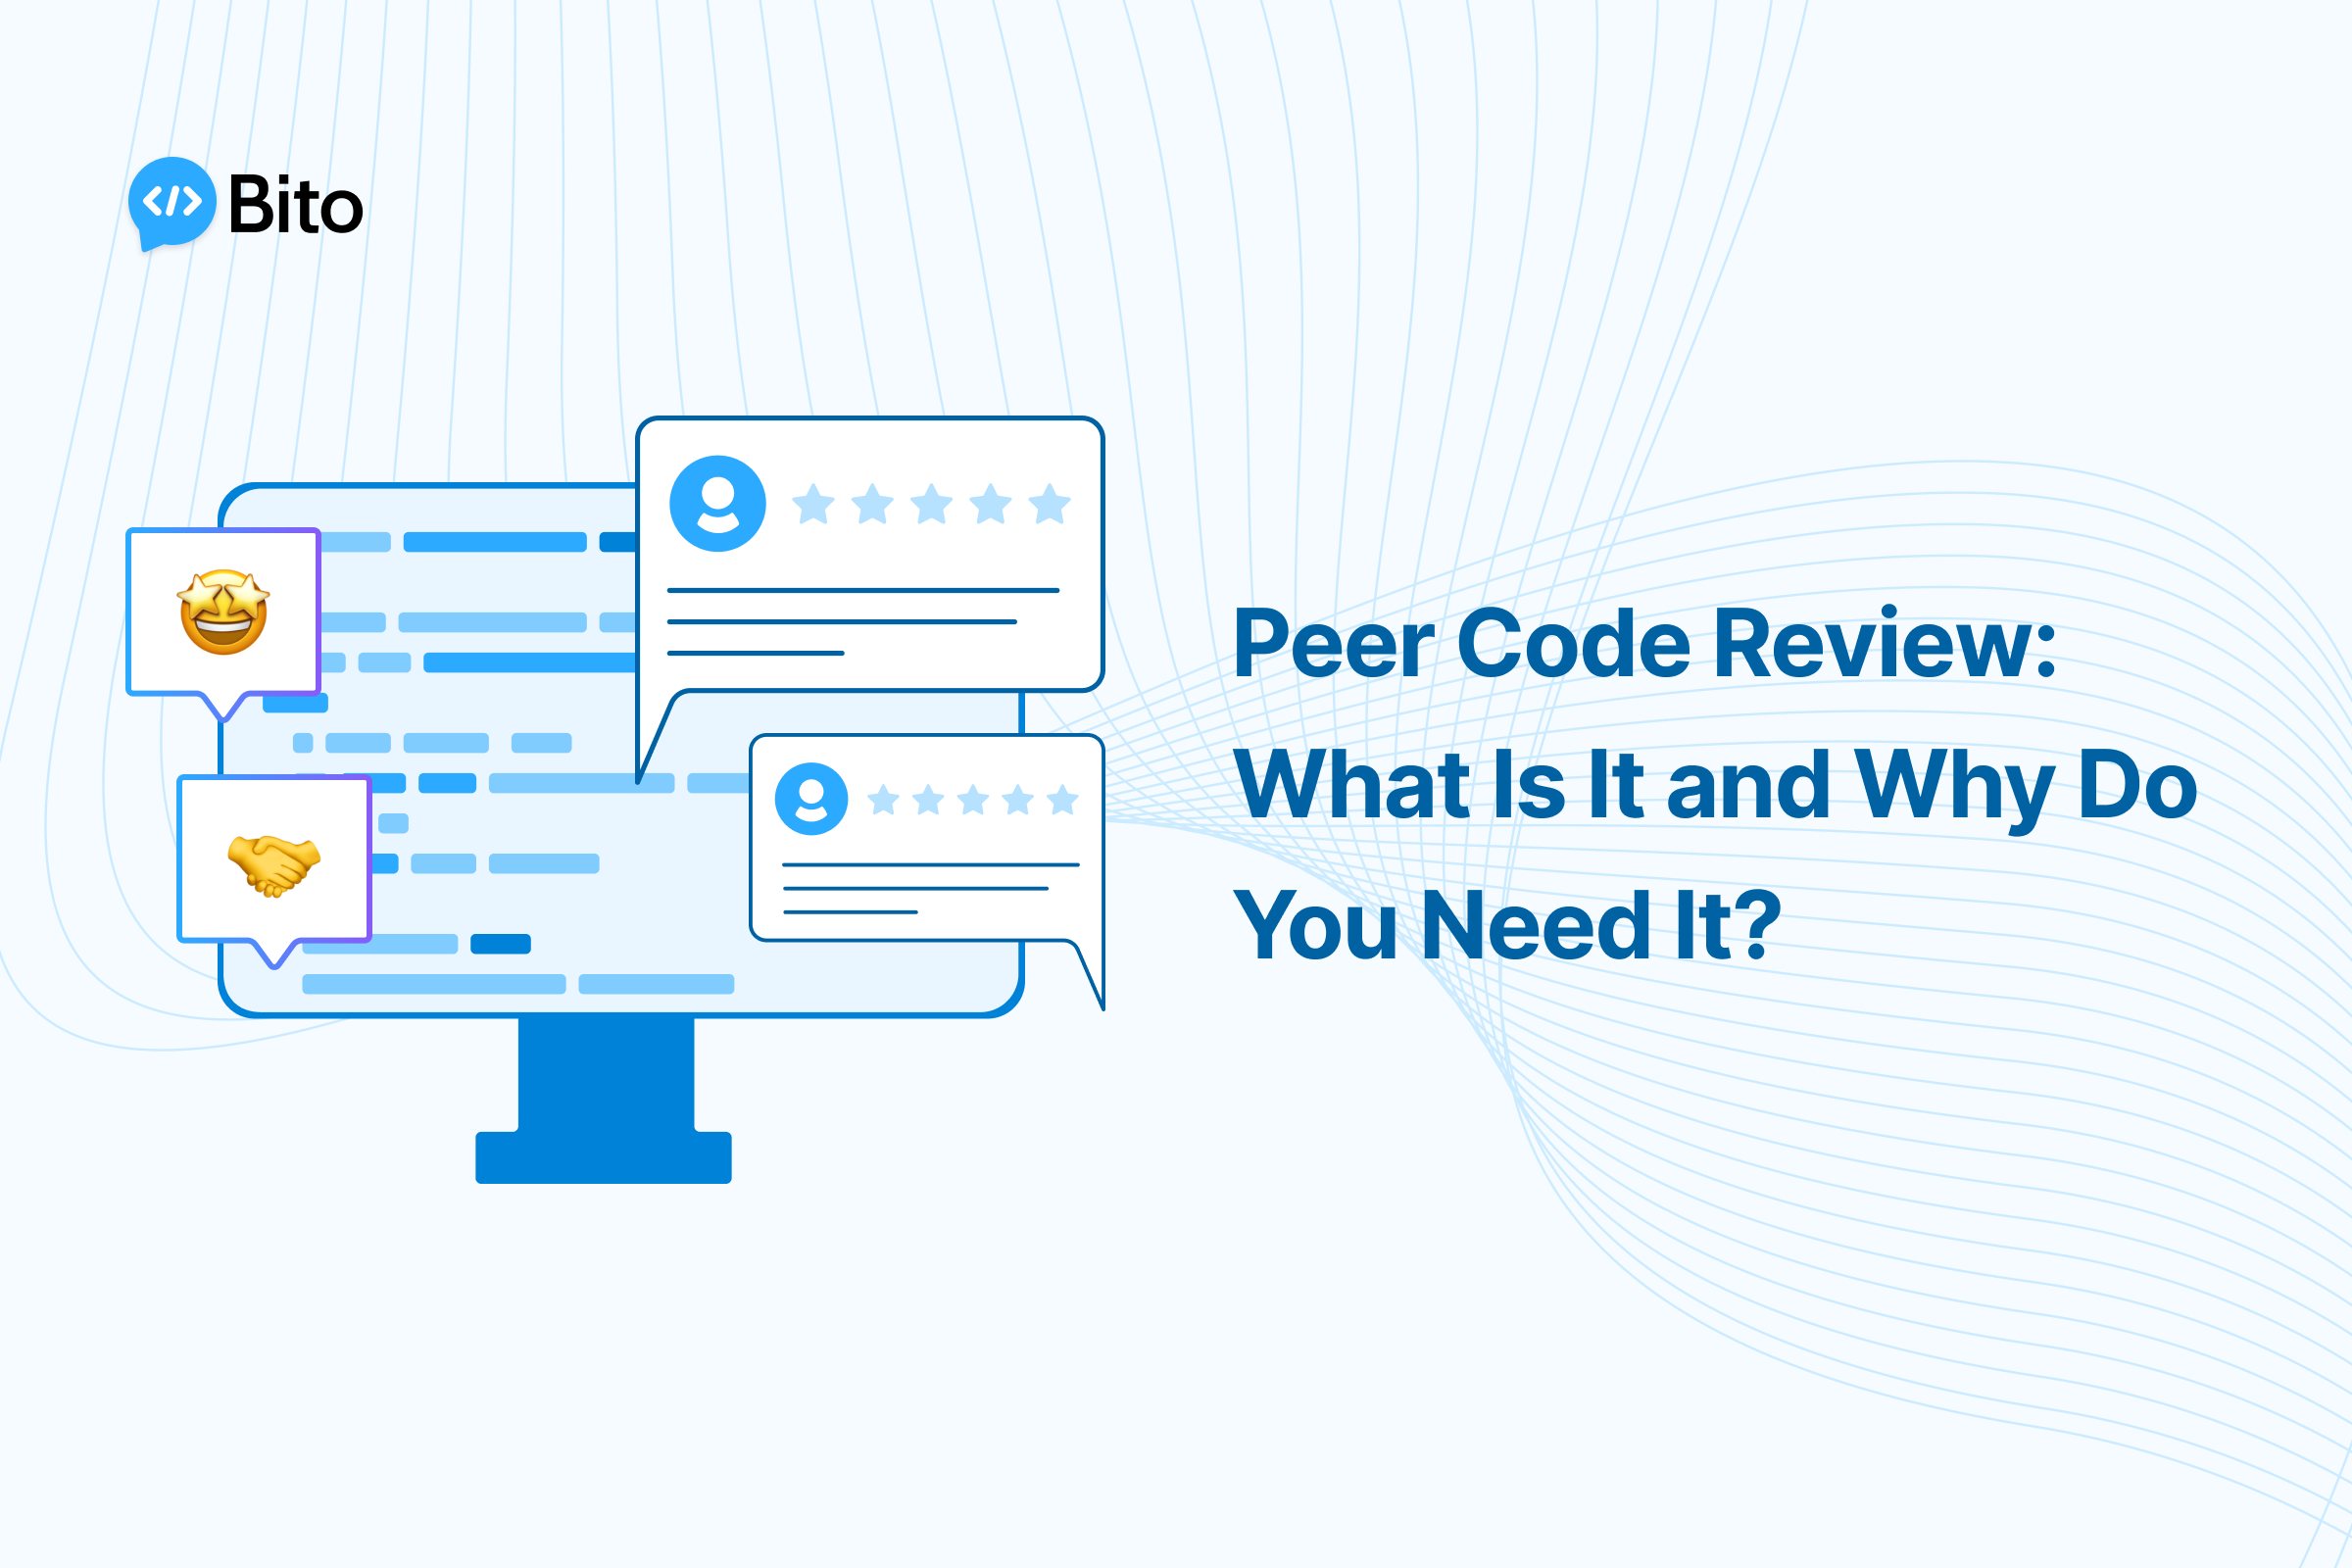 Peer Code Review: What Is It and Why Do You Need It?